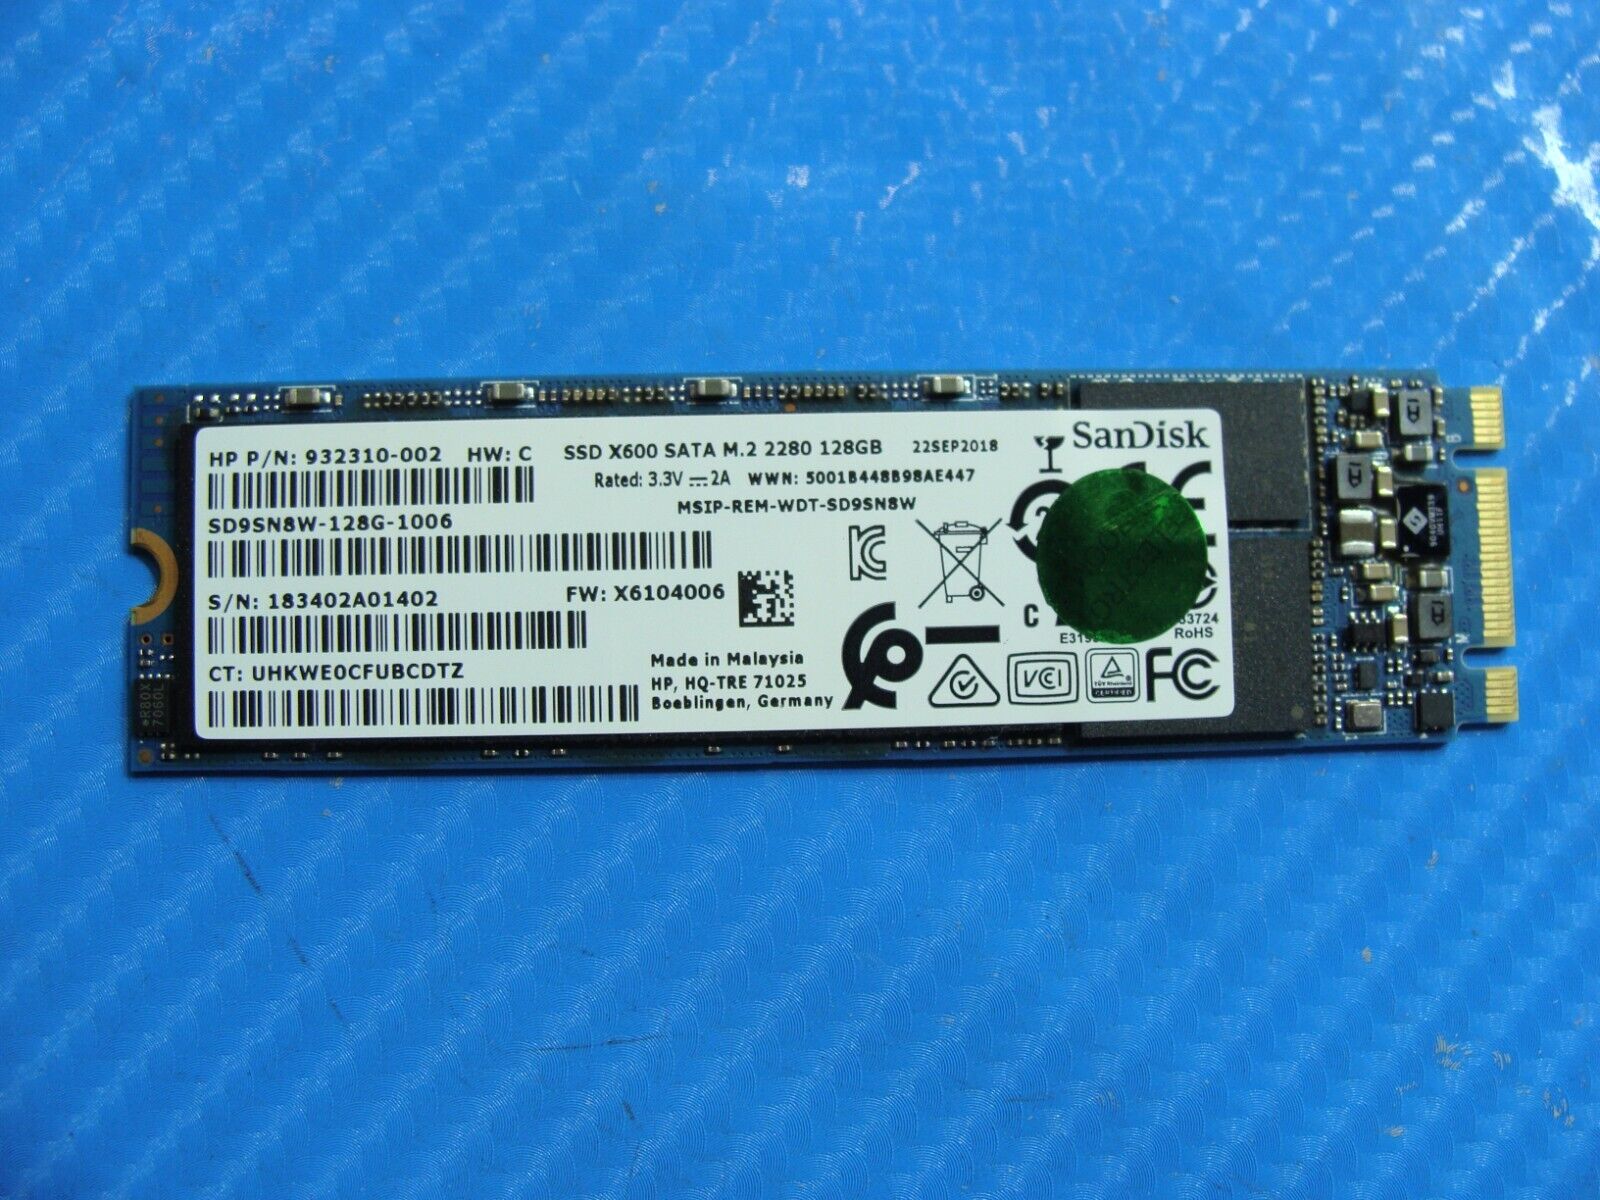 HP 14-df0023cl SanDisk 128GB SATA M.2 SSD Solid State Drive SD9SN8W-128G-1006